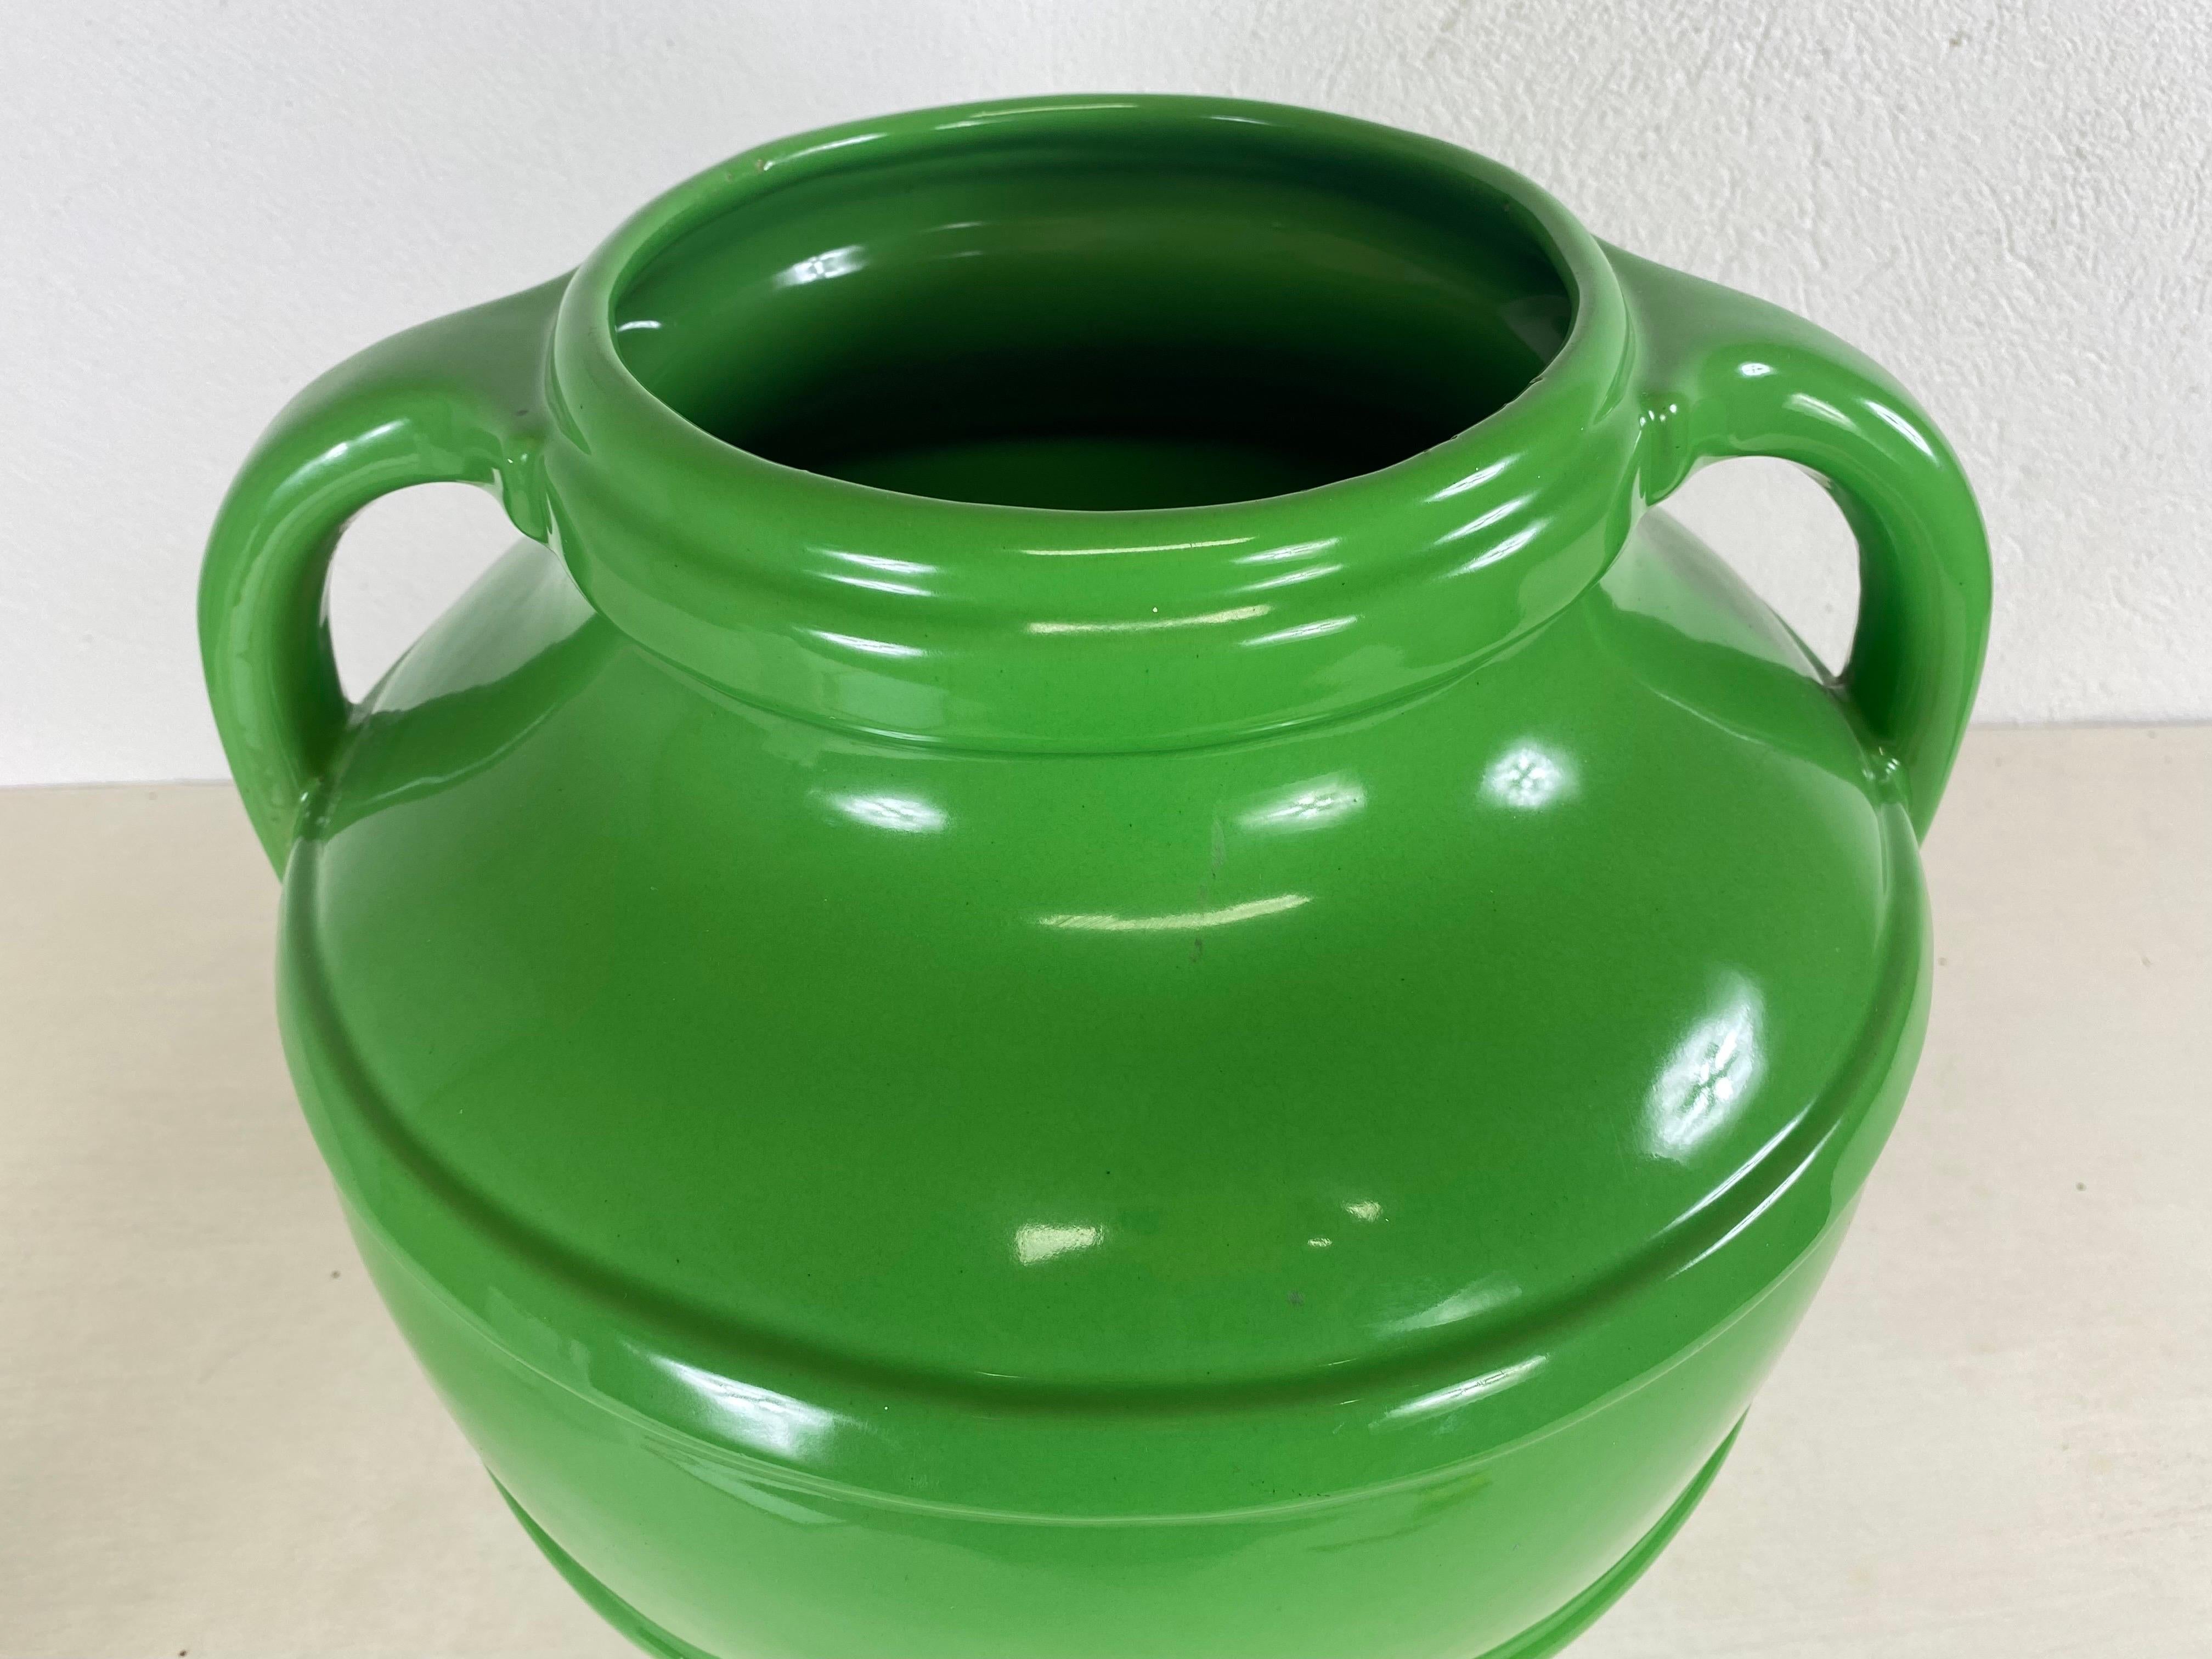 This is a vintage oversized, apple green pottery vase. This vase has two handles on either side and ribbed details around the surface. This dynamic Art Deco vase is in a brilliant apple green color. This deco style vase is American circa 1950.